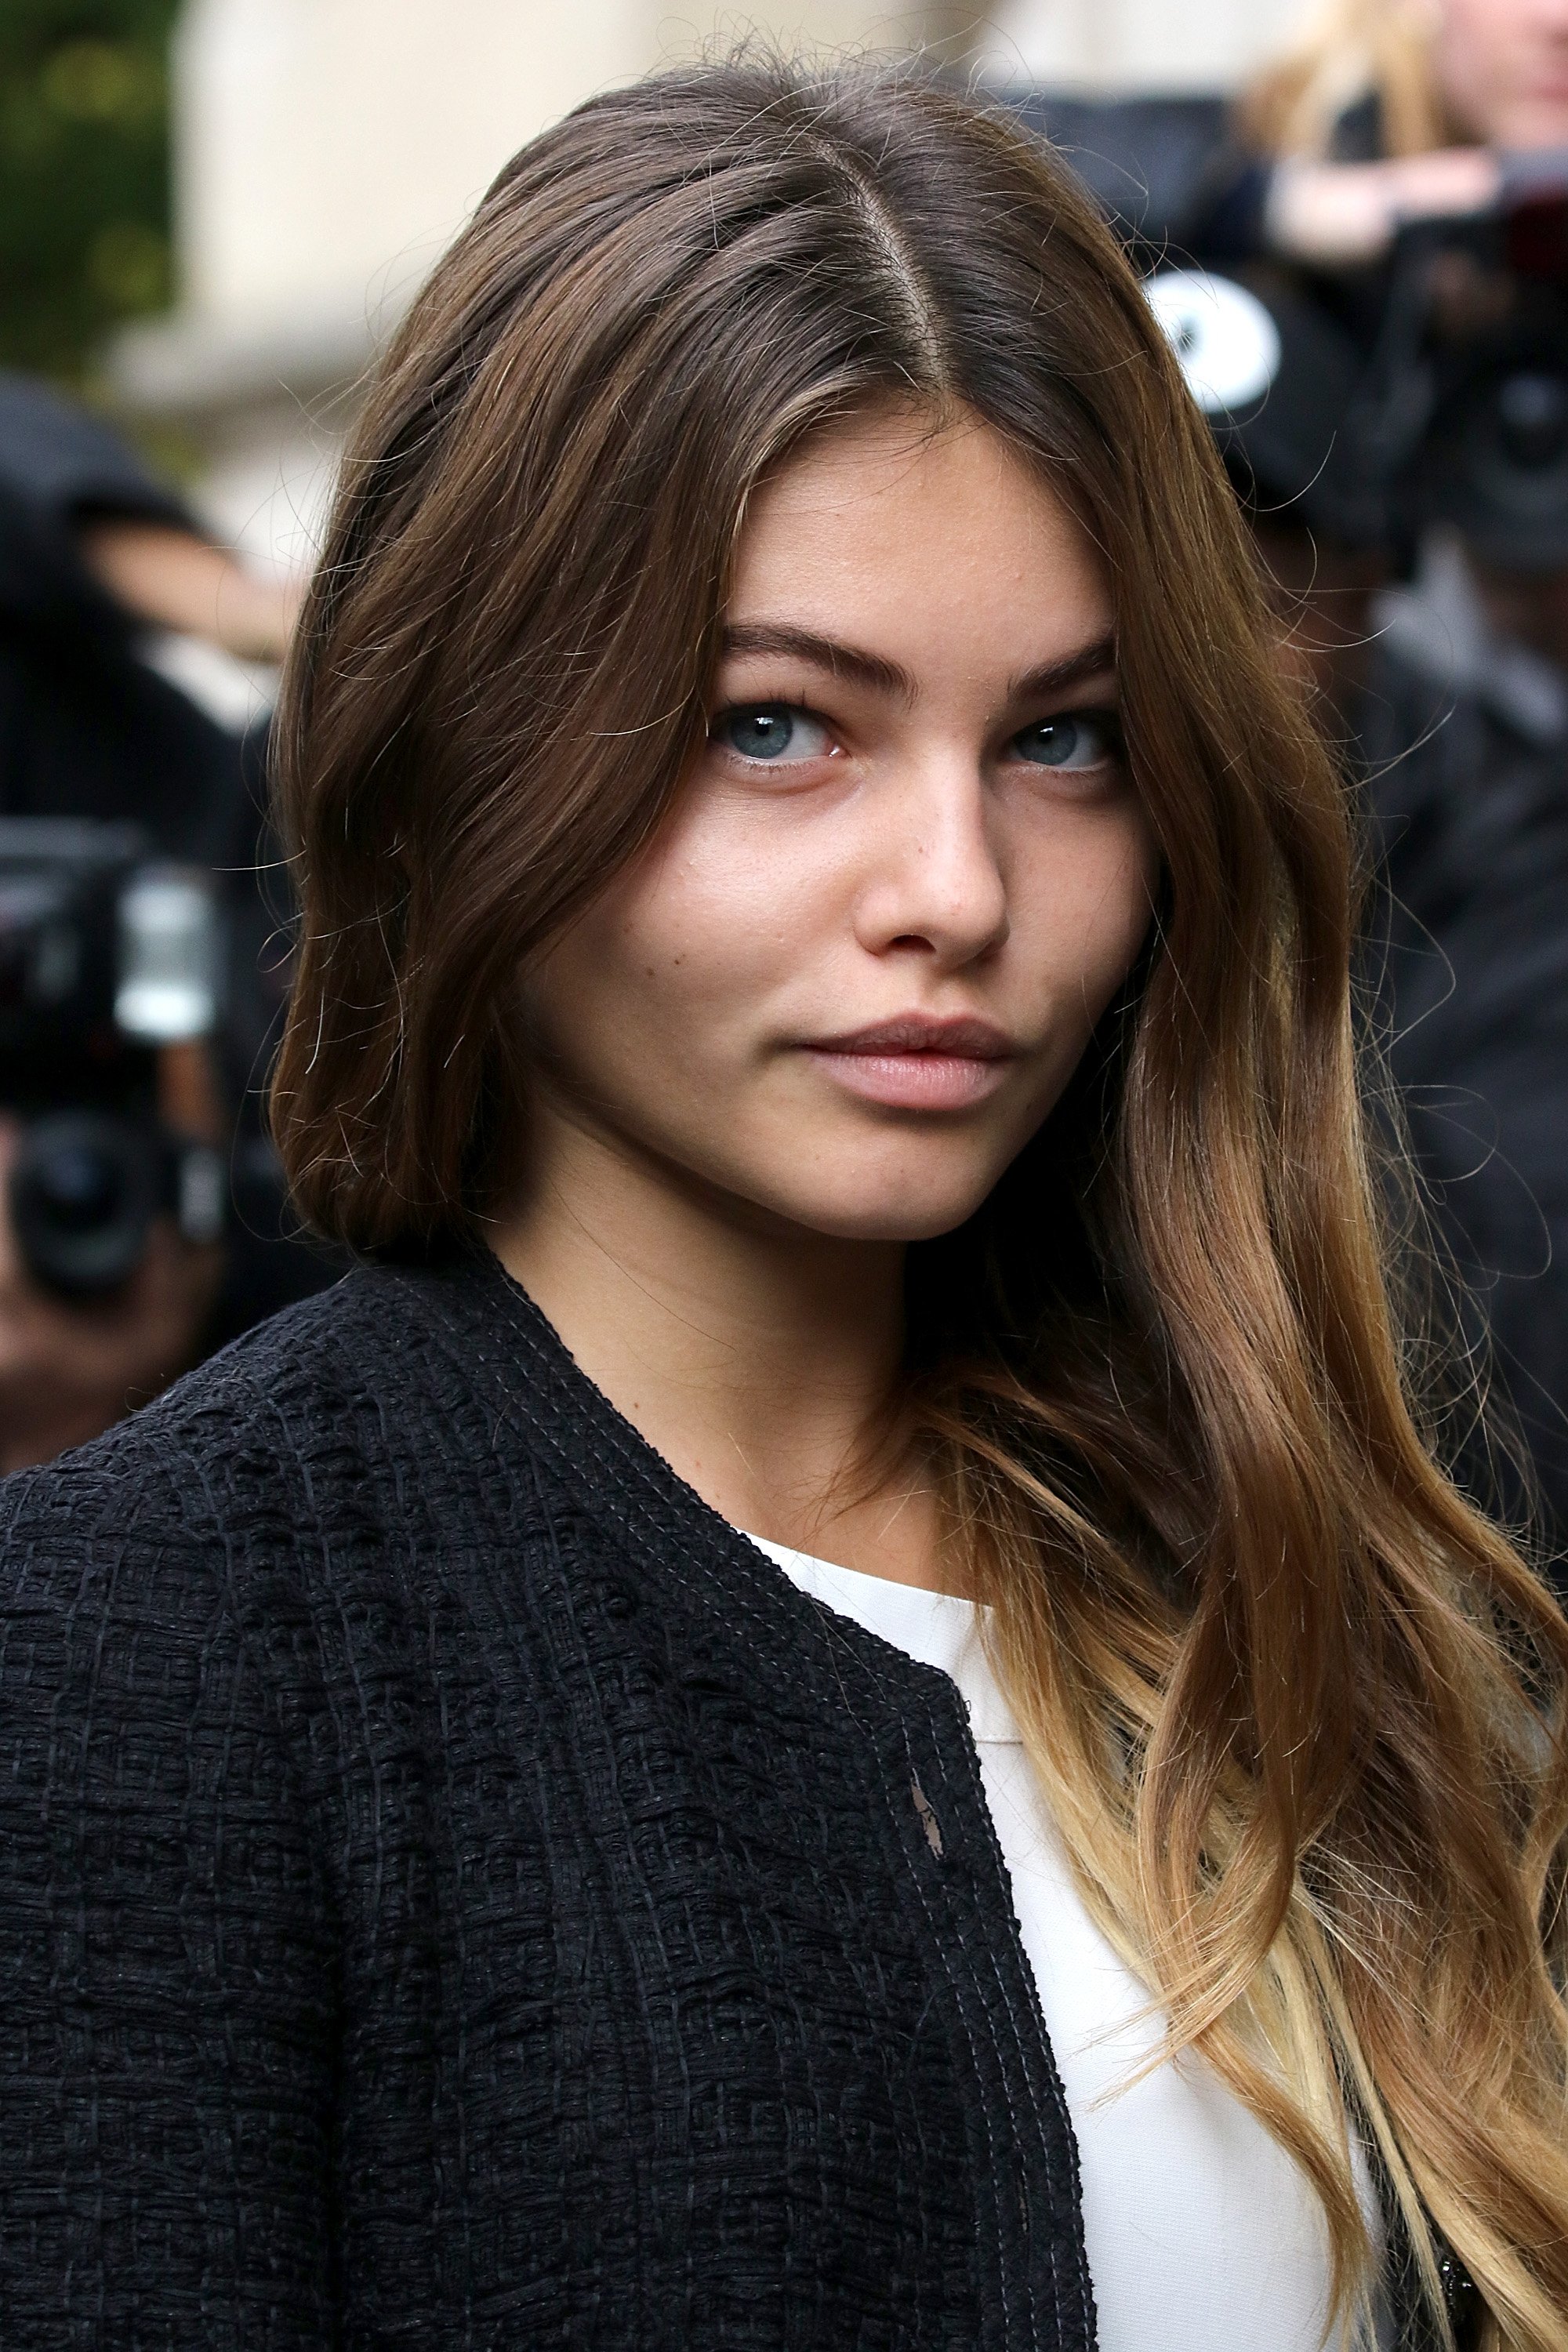 Thylane Blondeau at the Chanel during the Paris Fashion Week 2016. | Source: Getty Images